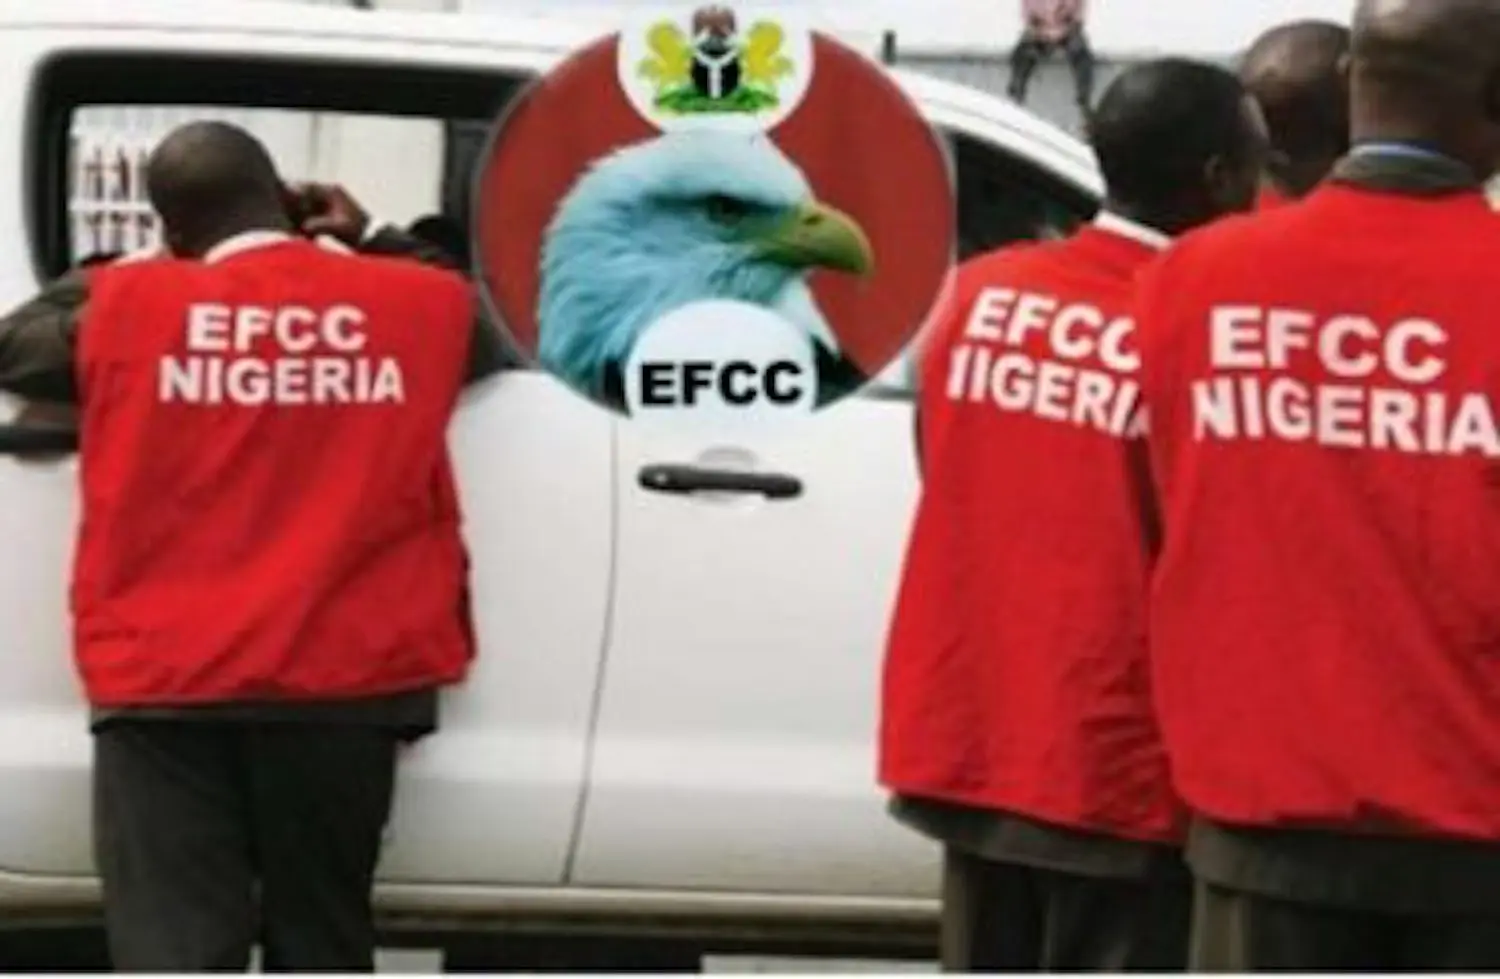 EFCC chairman orders arrest of operatives who broke into hotel rooms in Lagos